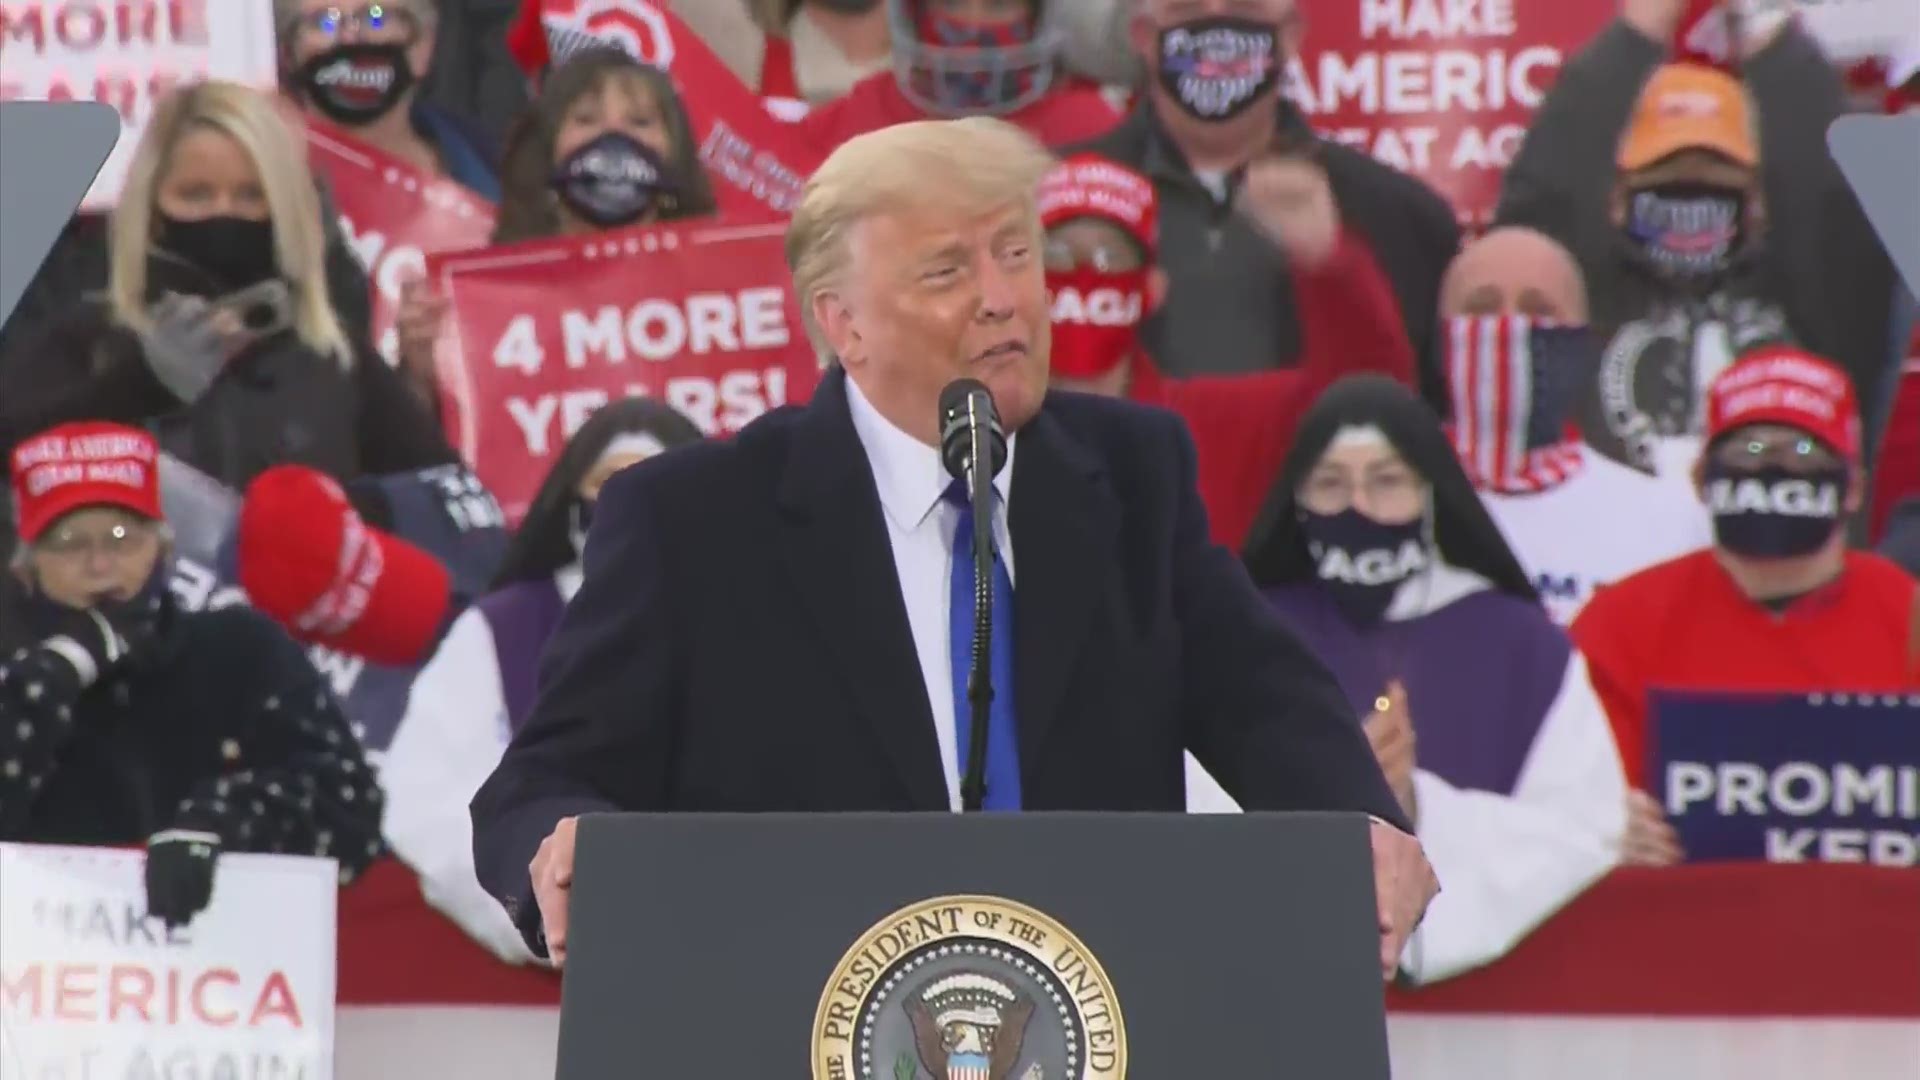 In a campaign speech in Circleville, President Trump welcomed the return of Big Ten football.